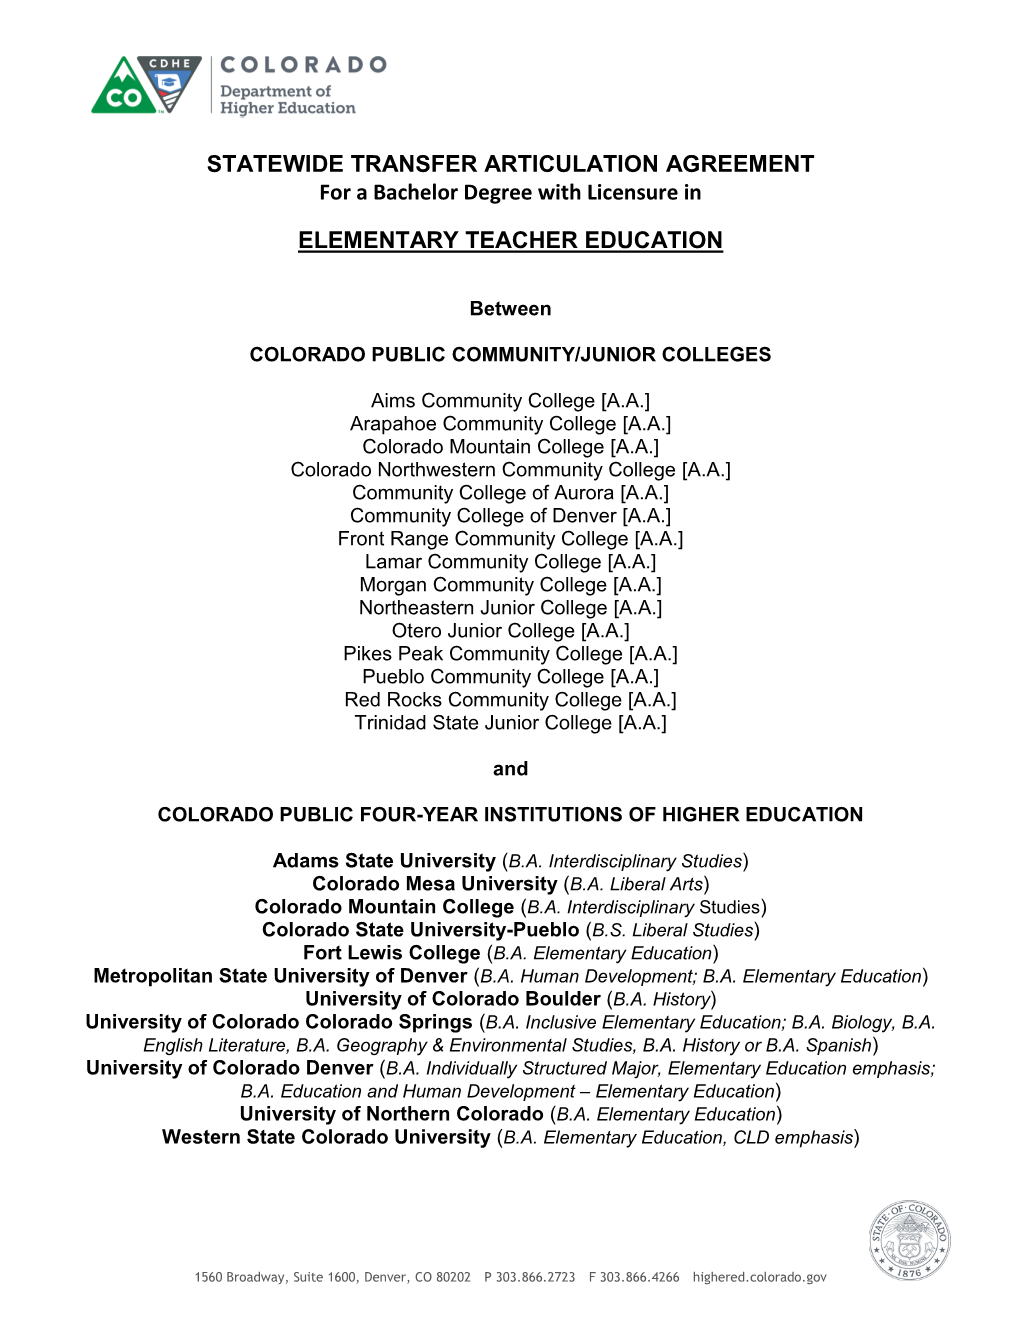 STATEWIDE TRANSFER ARTICULATION AGREEMENT for a Bachelor Degree with Licensure in ELEMENTARY TEACHER EDUCATION